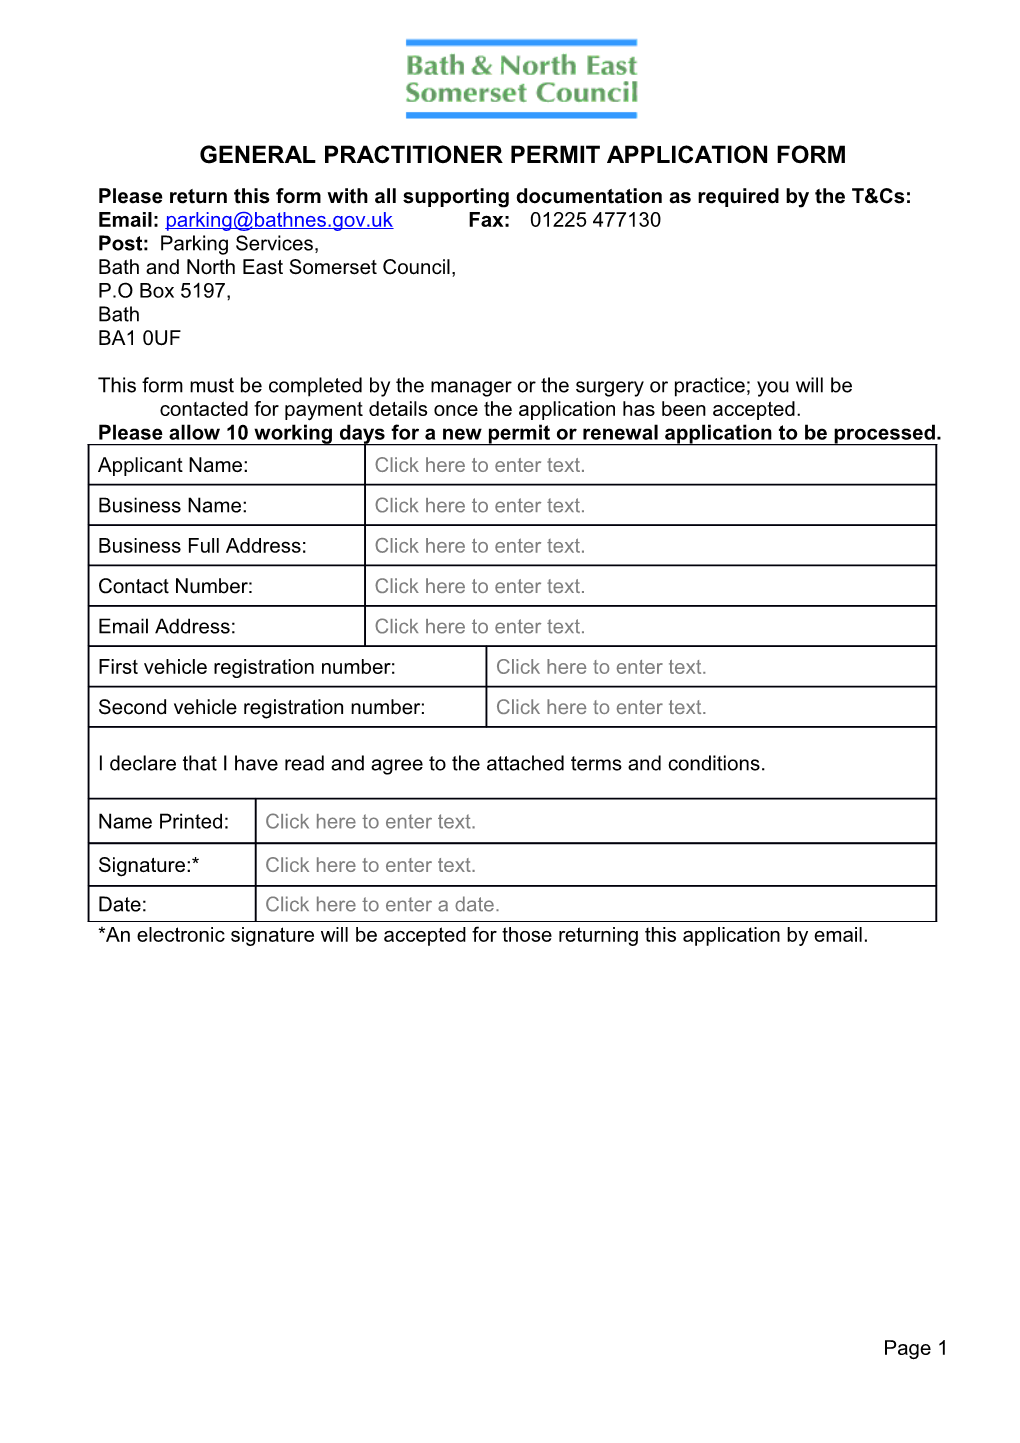 General Practitioner Permit Application Form